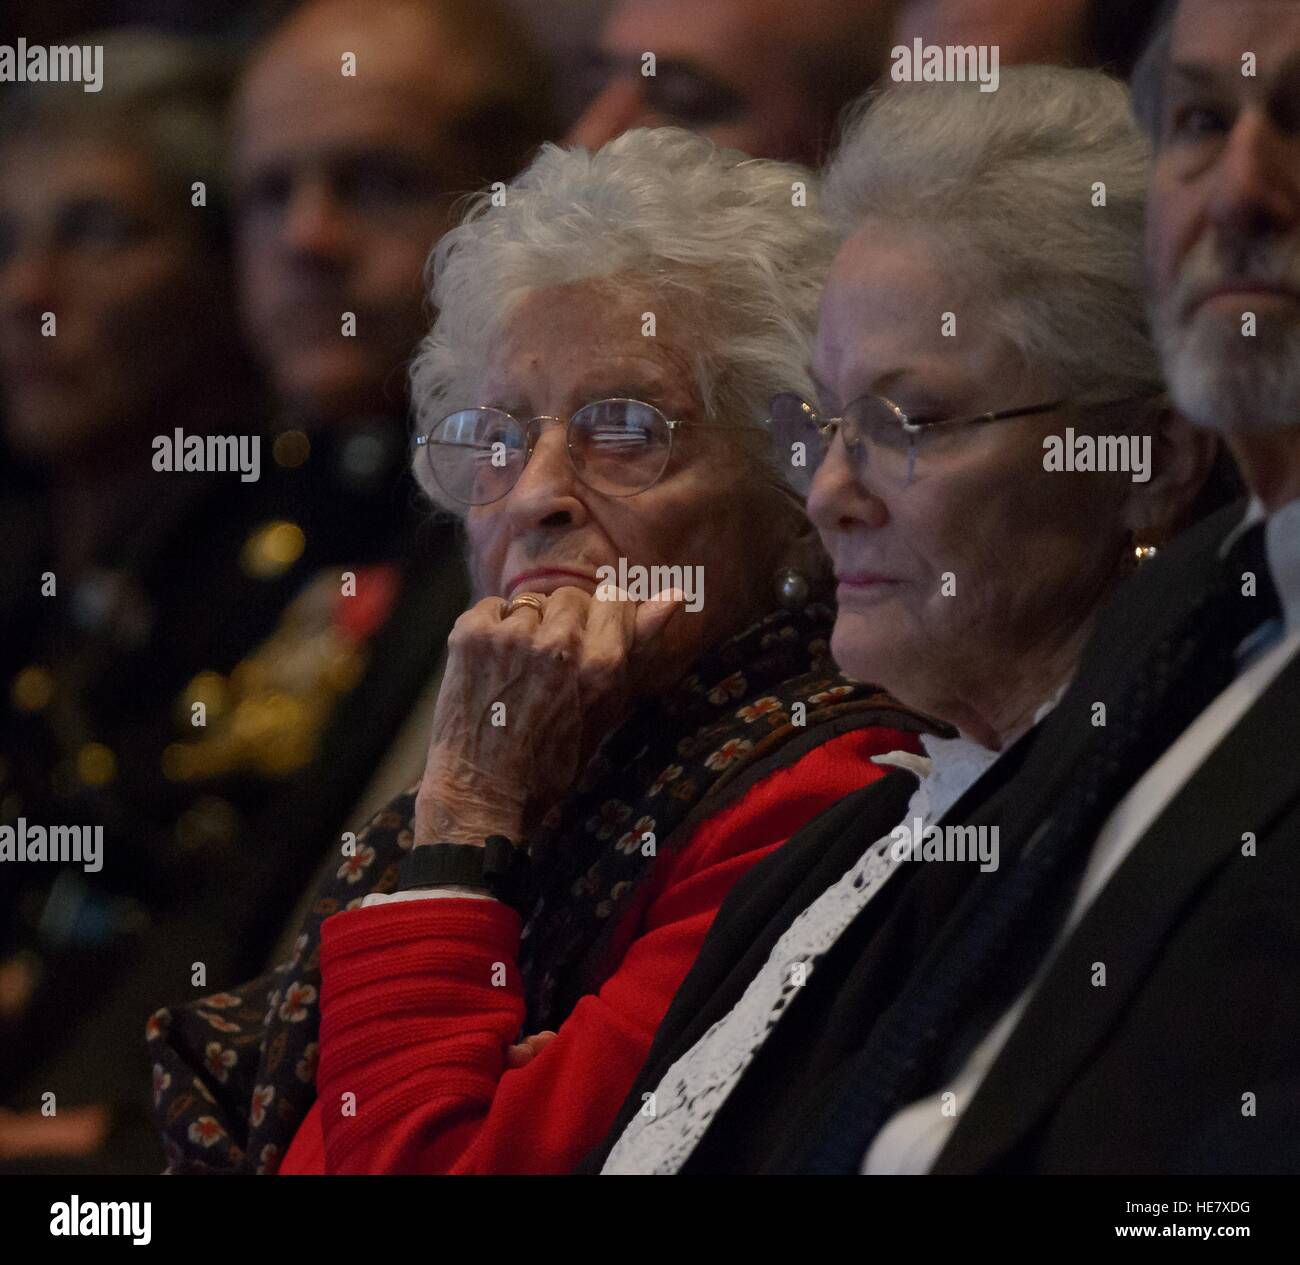 The flag draped casket of former astronaut and Senator John Glenn is reflected in the glasses of his wife Annie Glenn, as she and her daughter Lyn attend a ceremony celebrating his life at Ohio State University December 17, 2016 in Columbus, Ohio. The former Marine pilot, Senator and first man to orbit the earth died last week at the age of 95. Stock Photo